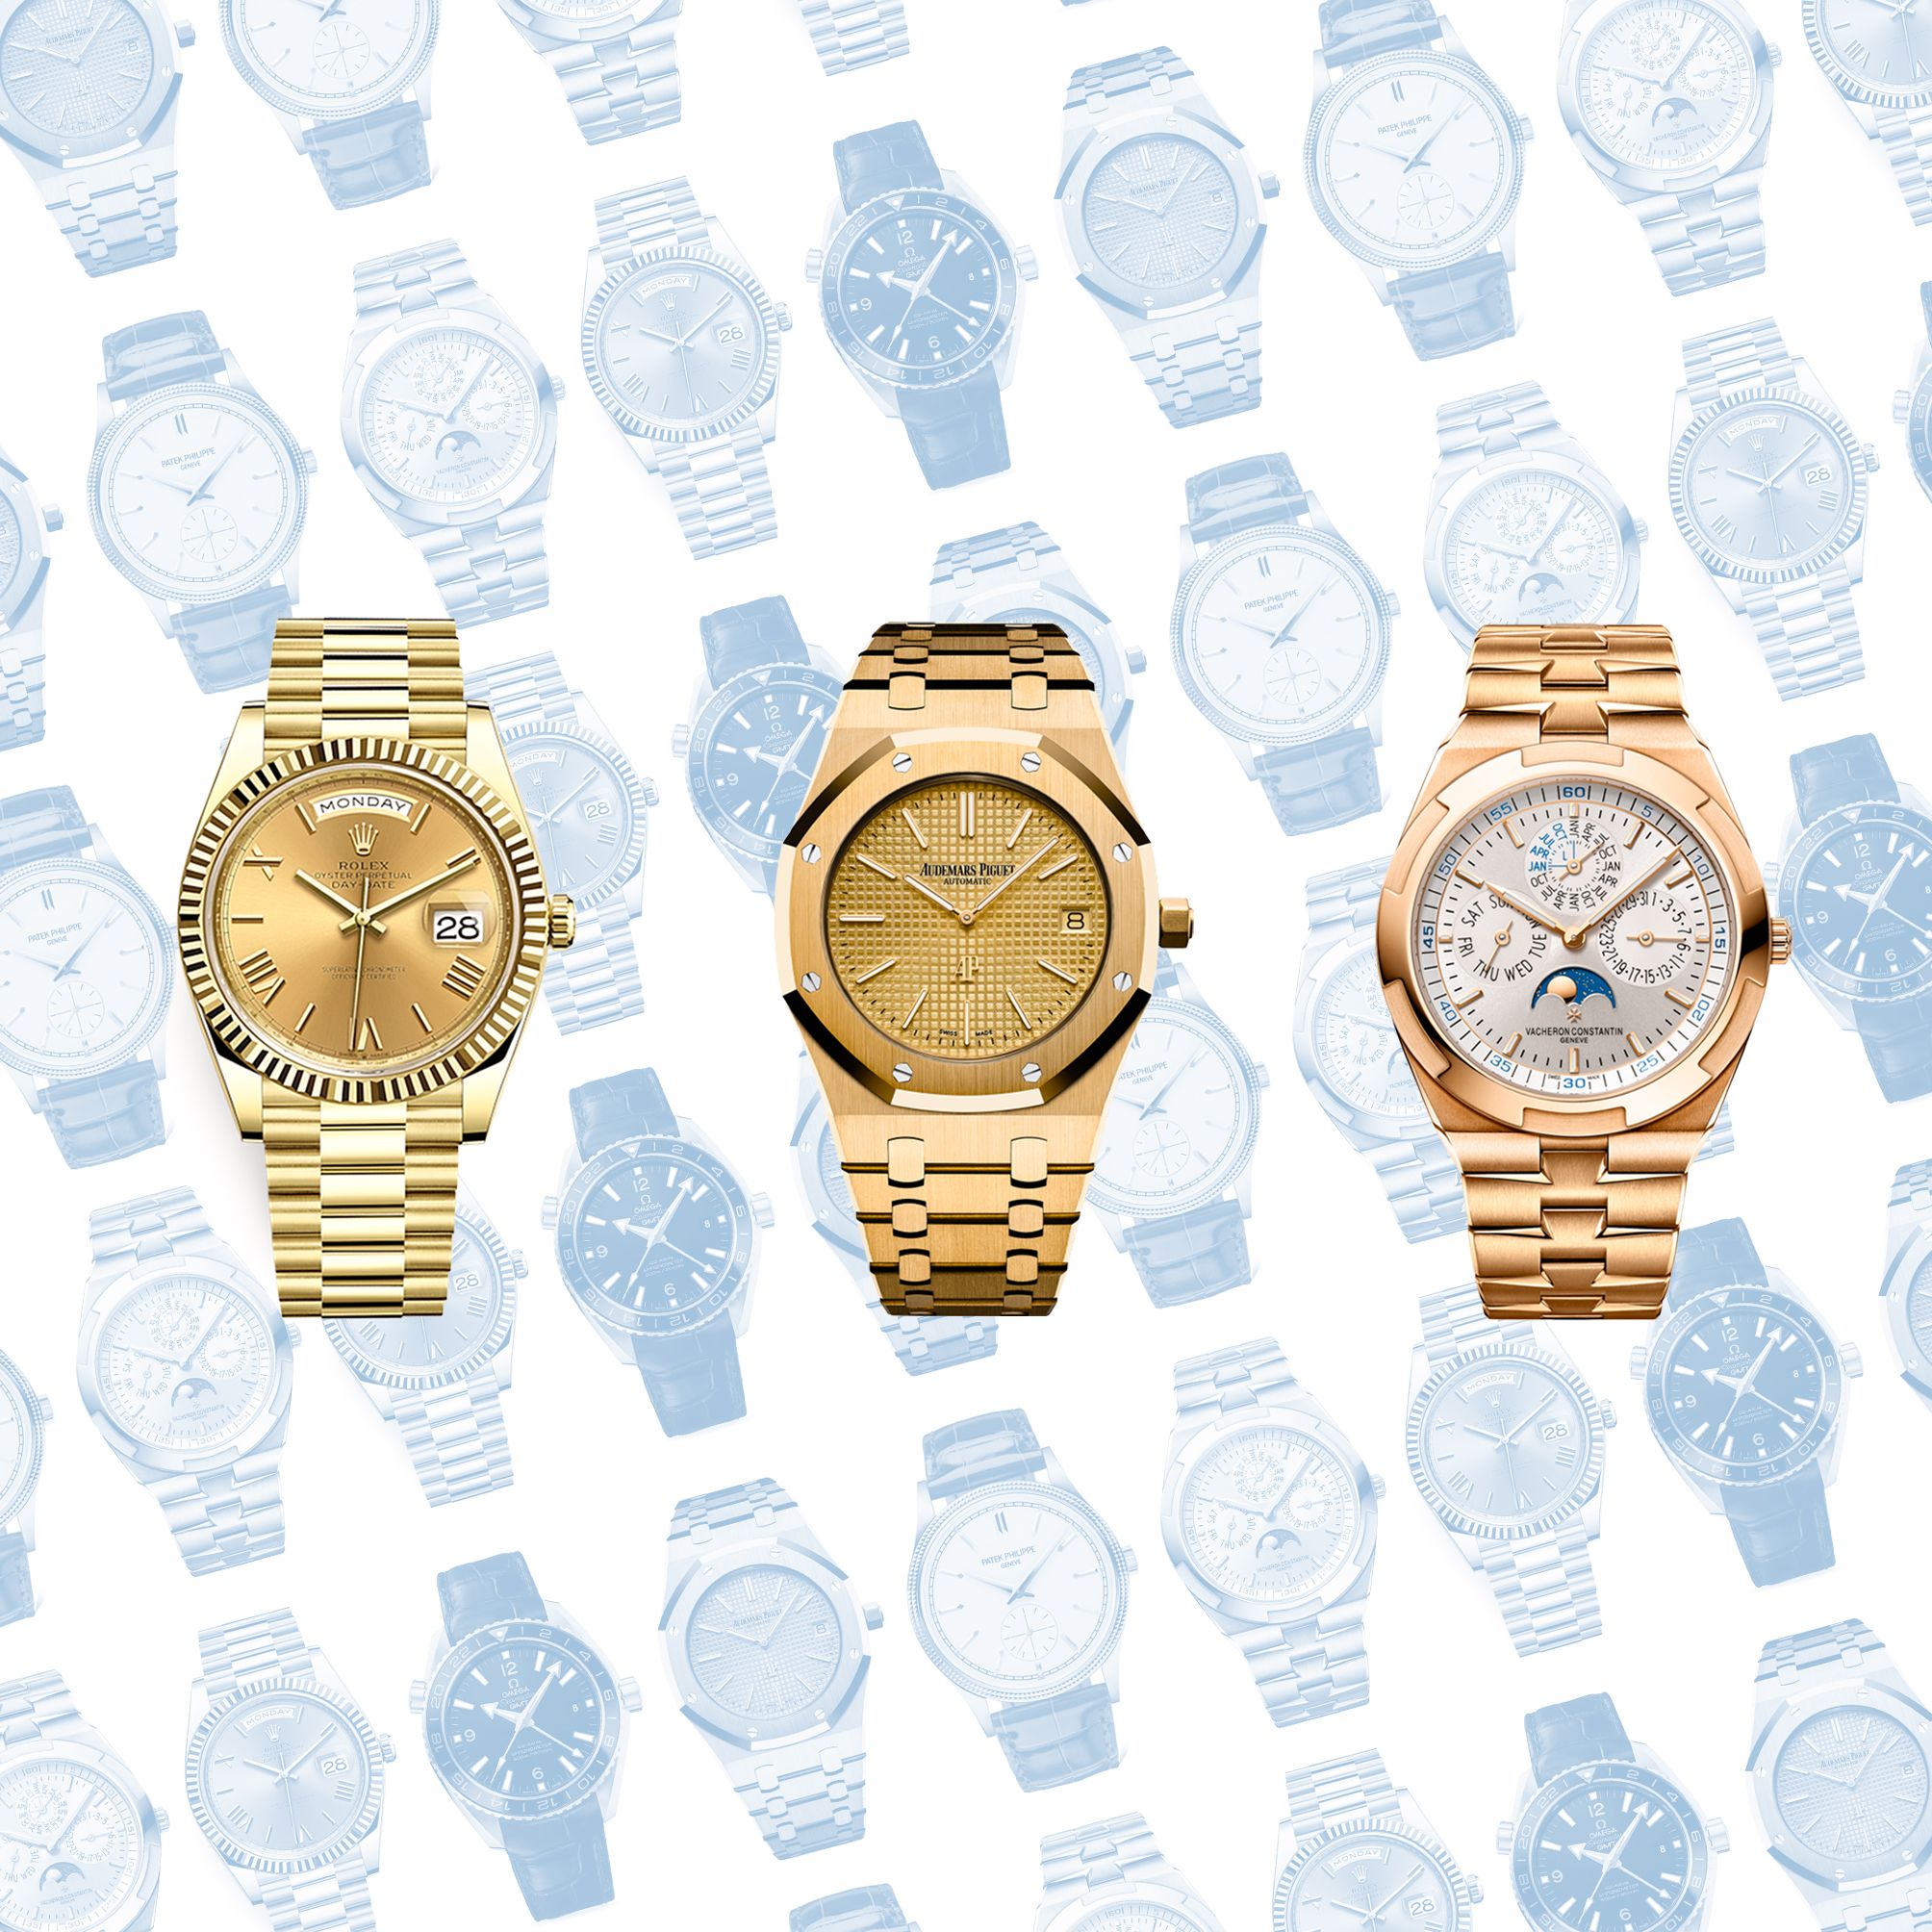 13 Best Gold Watches For Men In 2021 - Top Men'S Gold Watches This Year